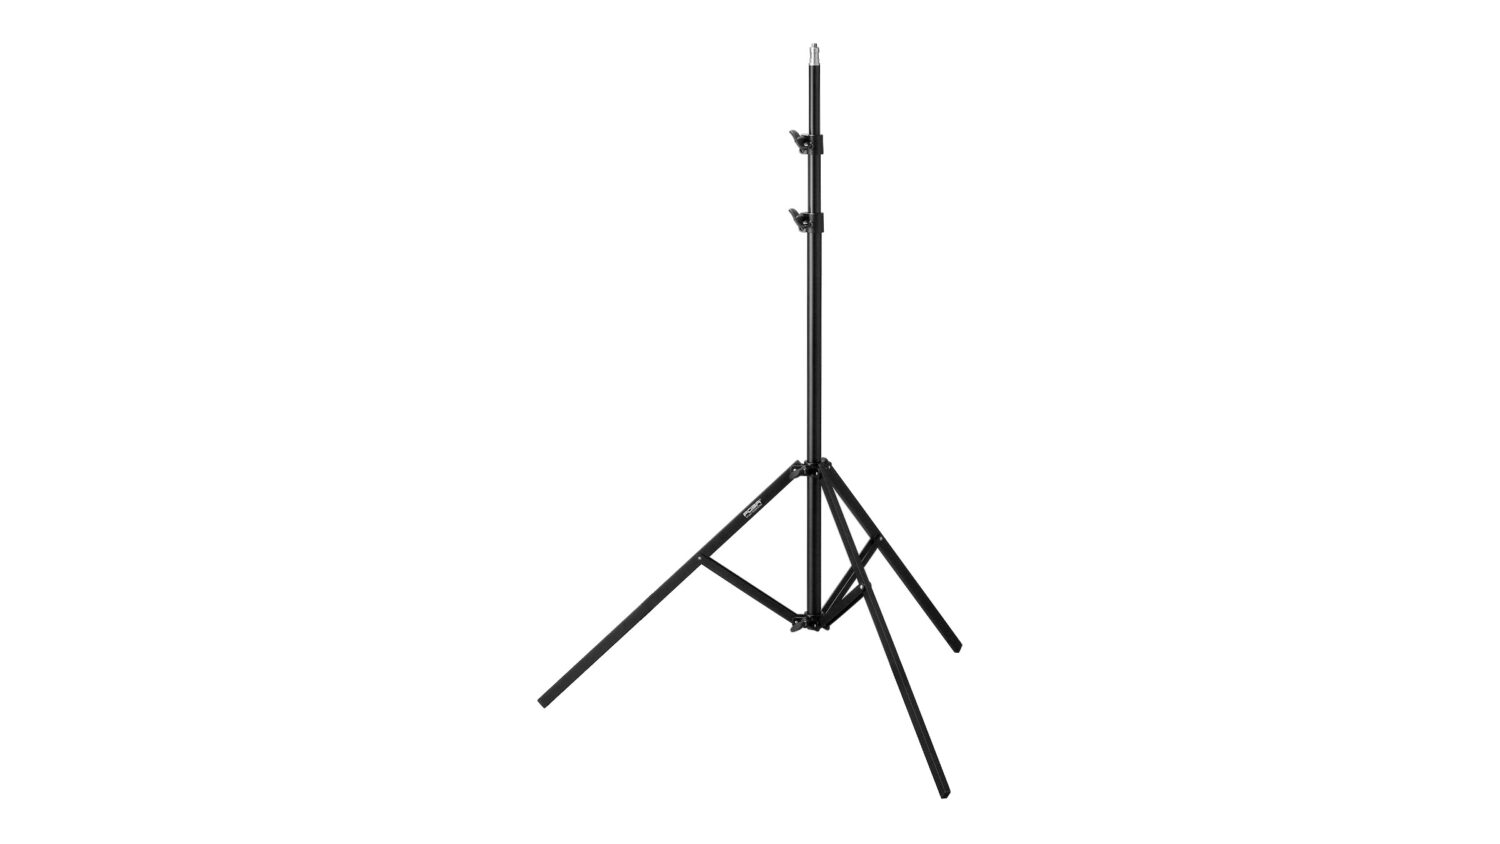 FOBA lamp stand with telescope tube extension